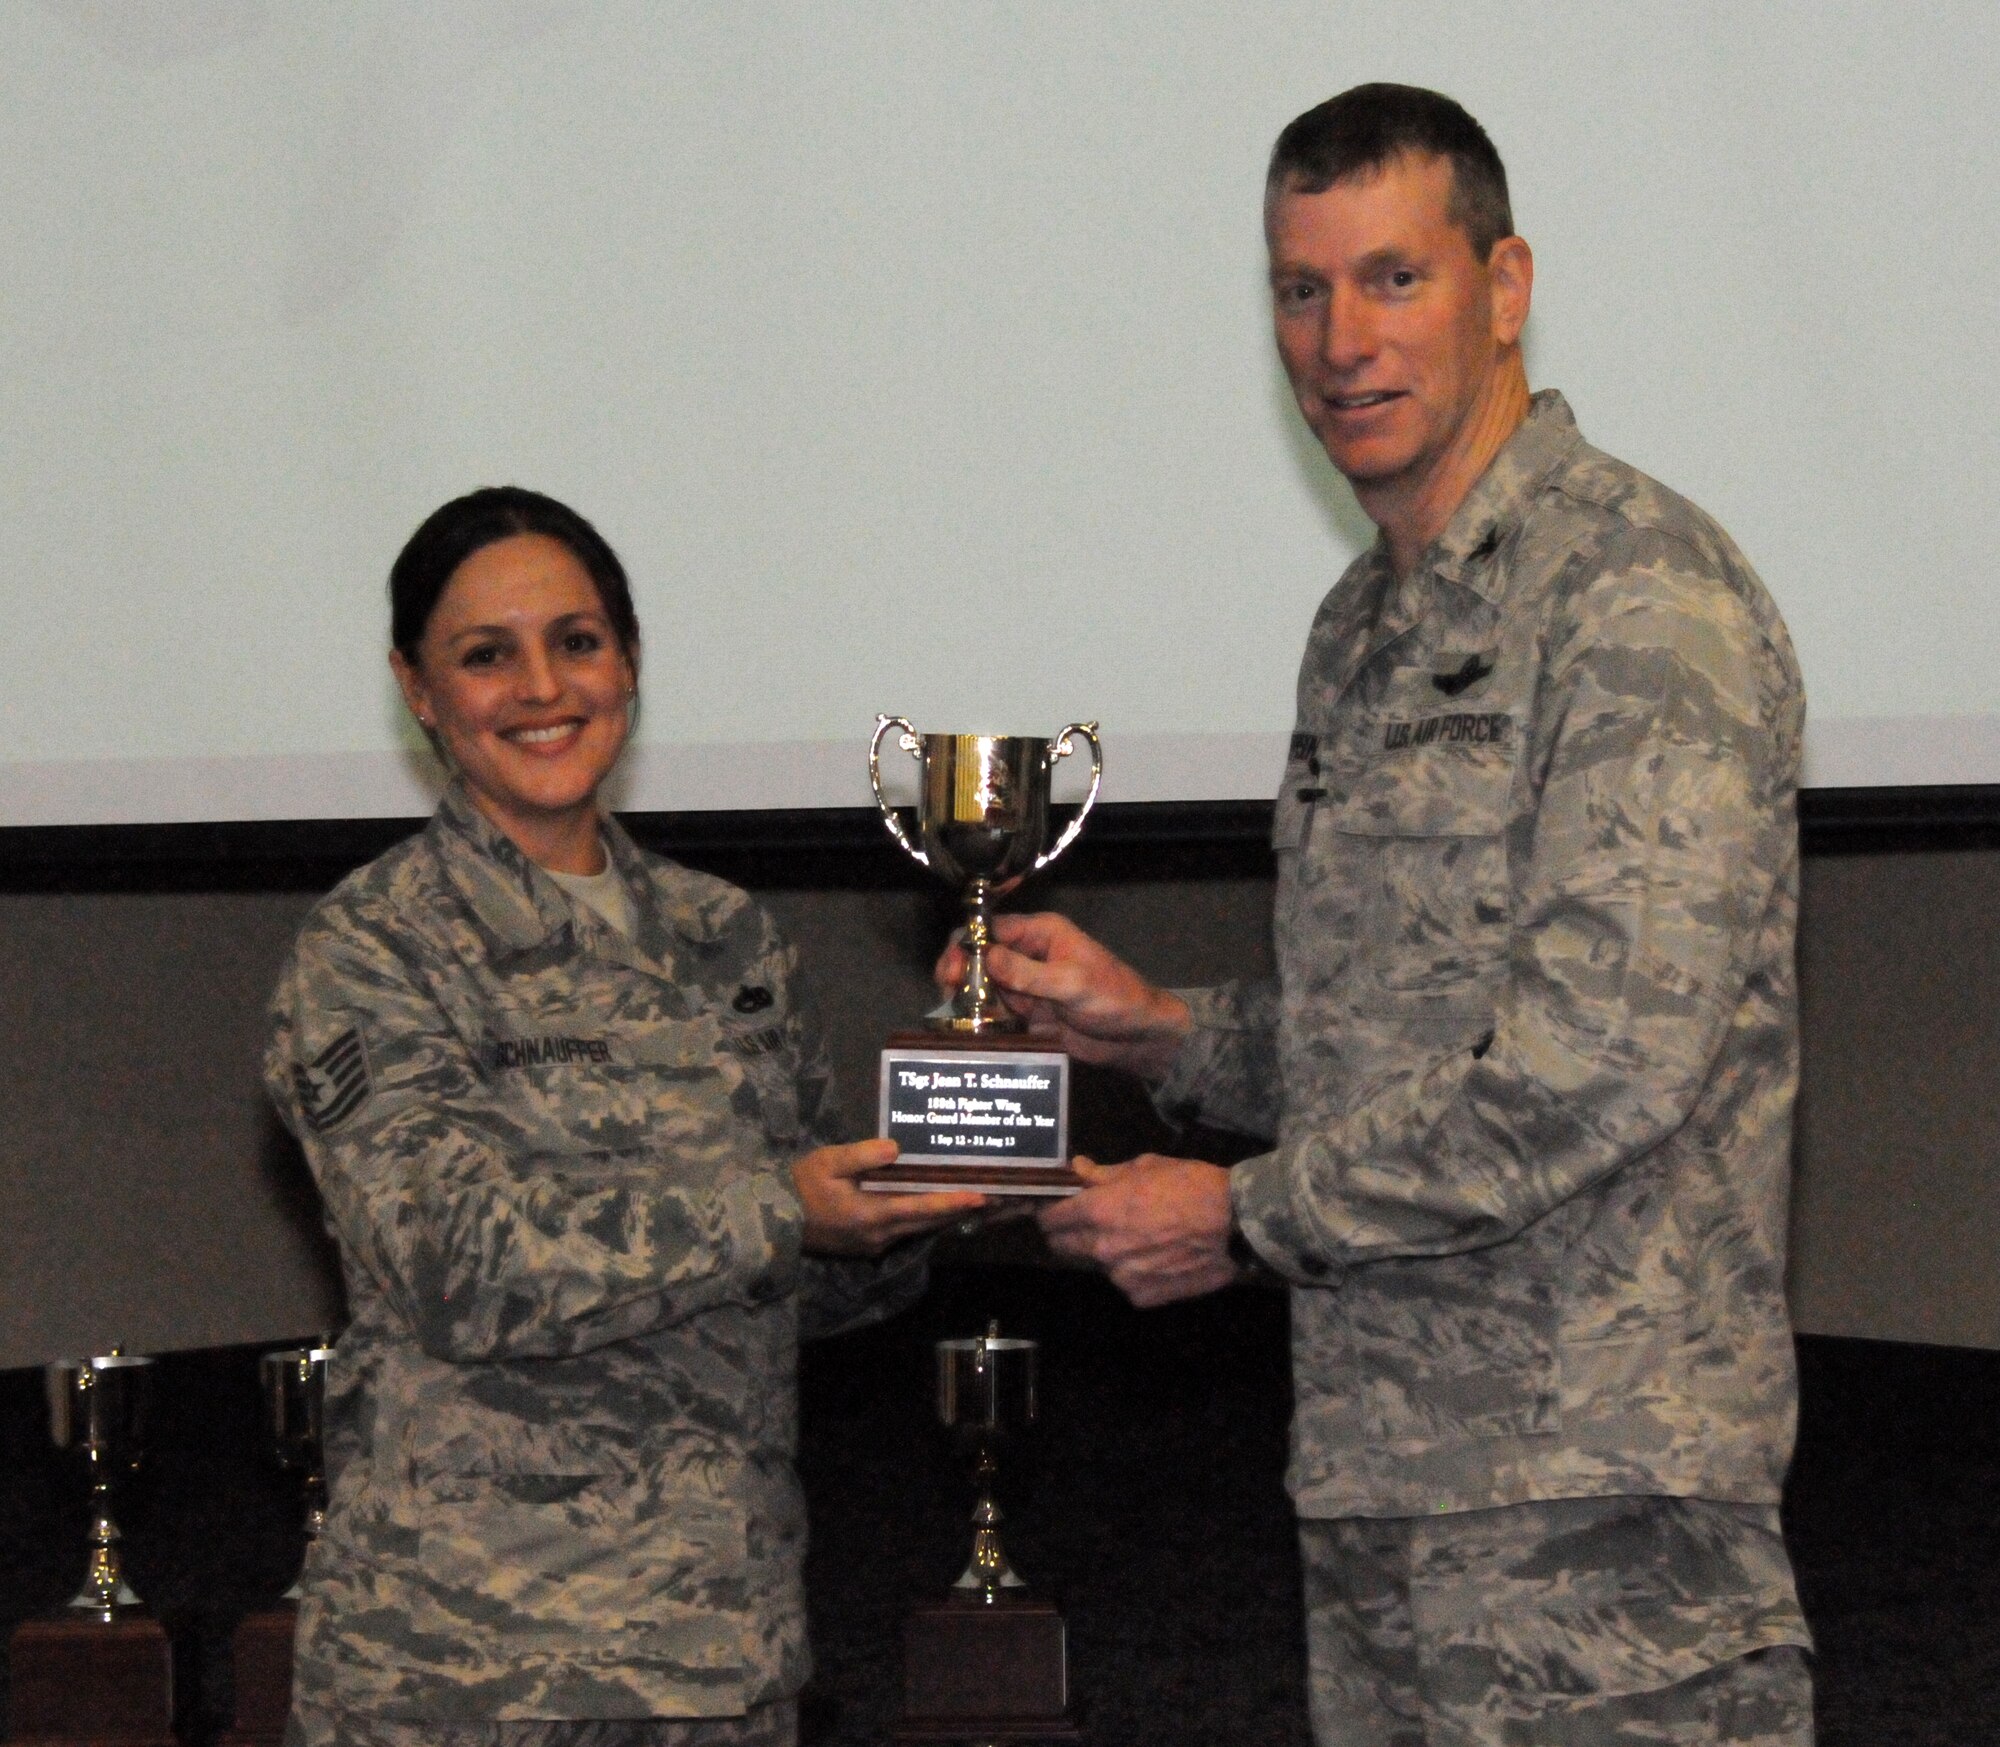 Col. Mark Anderson, 188th Fighter Wing commander, right, presents the 188th Outstanding Honor Guard Member of the Year award to Tech Sgt. Jean Schnauffer during a commander’s call presentation Feb. 8, 2014. (U.S. Air National Guard photo by Airman 1st Class Cody Martin)